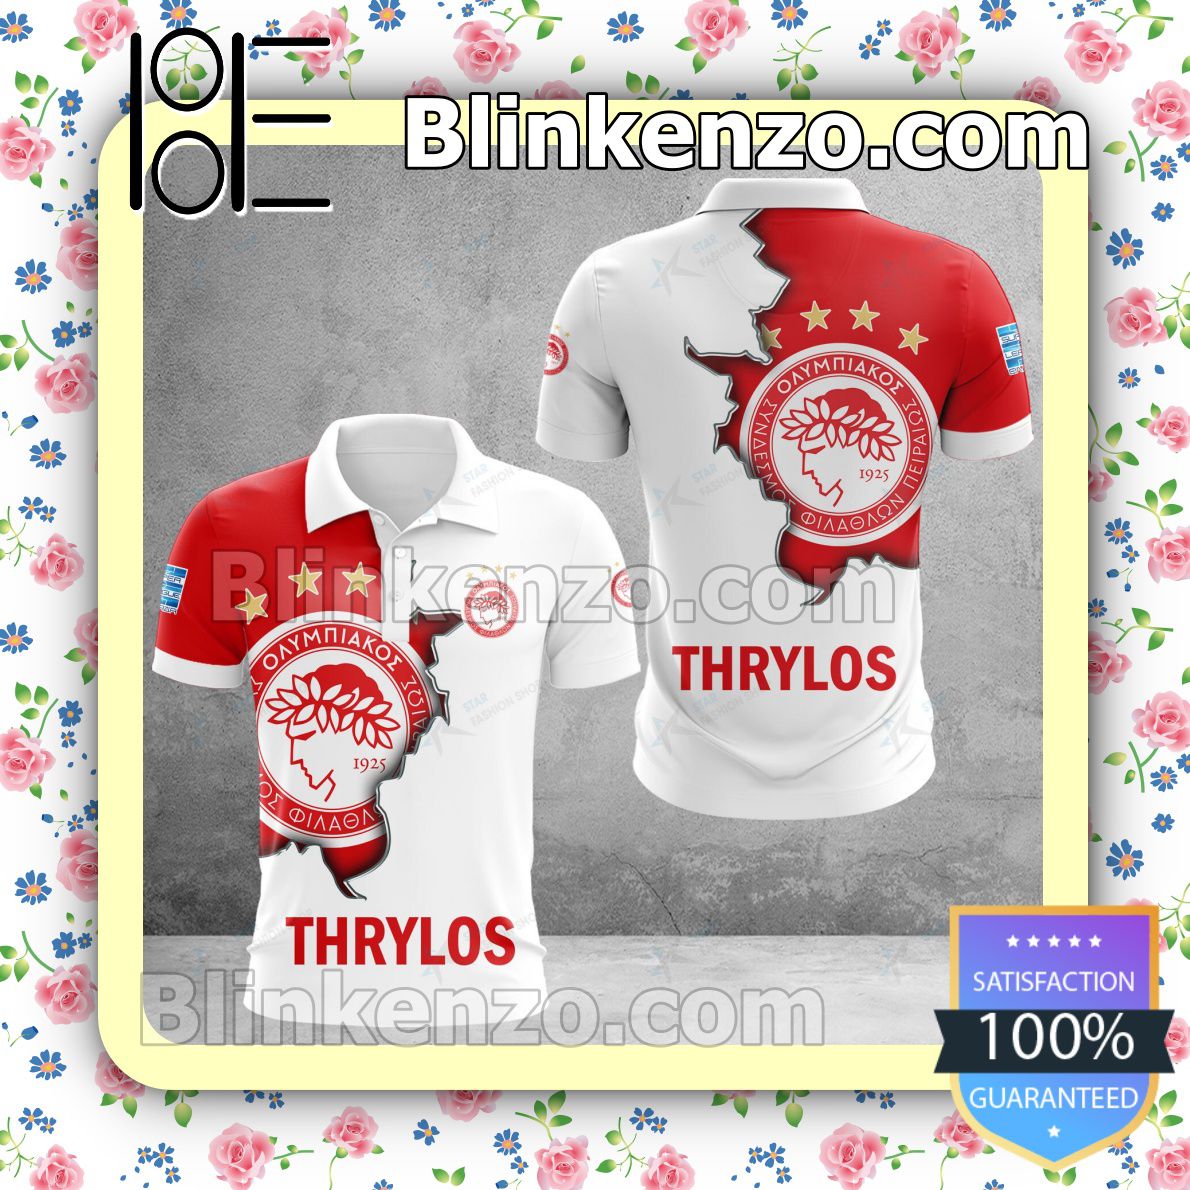 Olympiacos F.C. T-shirt, Christmas Sweater